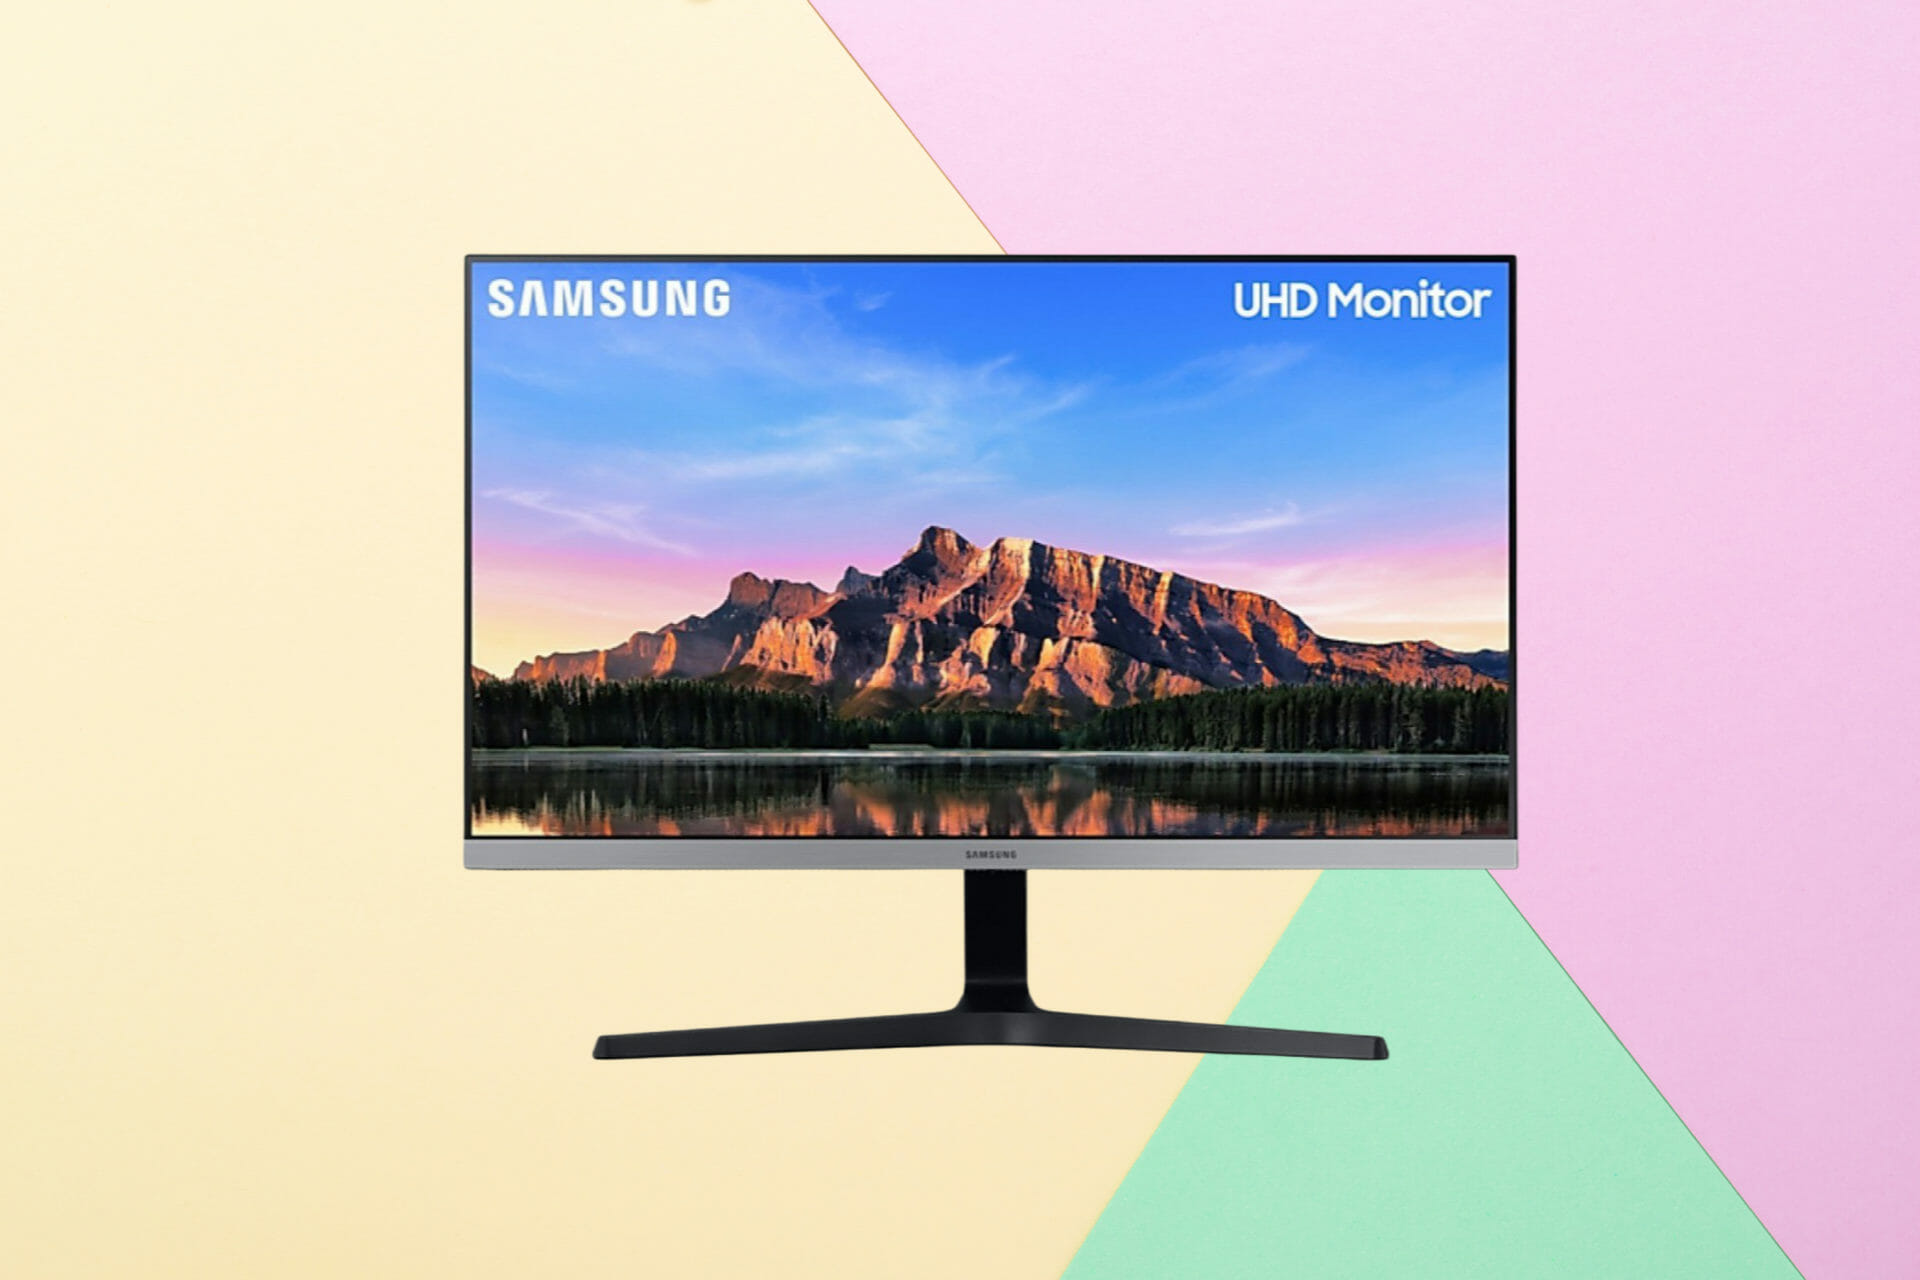 Samsung monitor with a mountain background